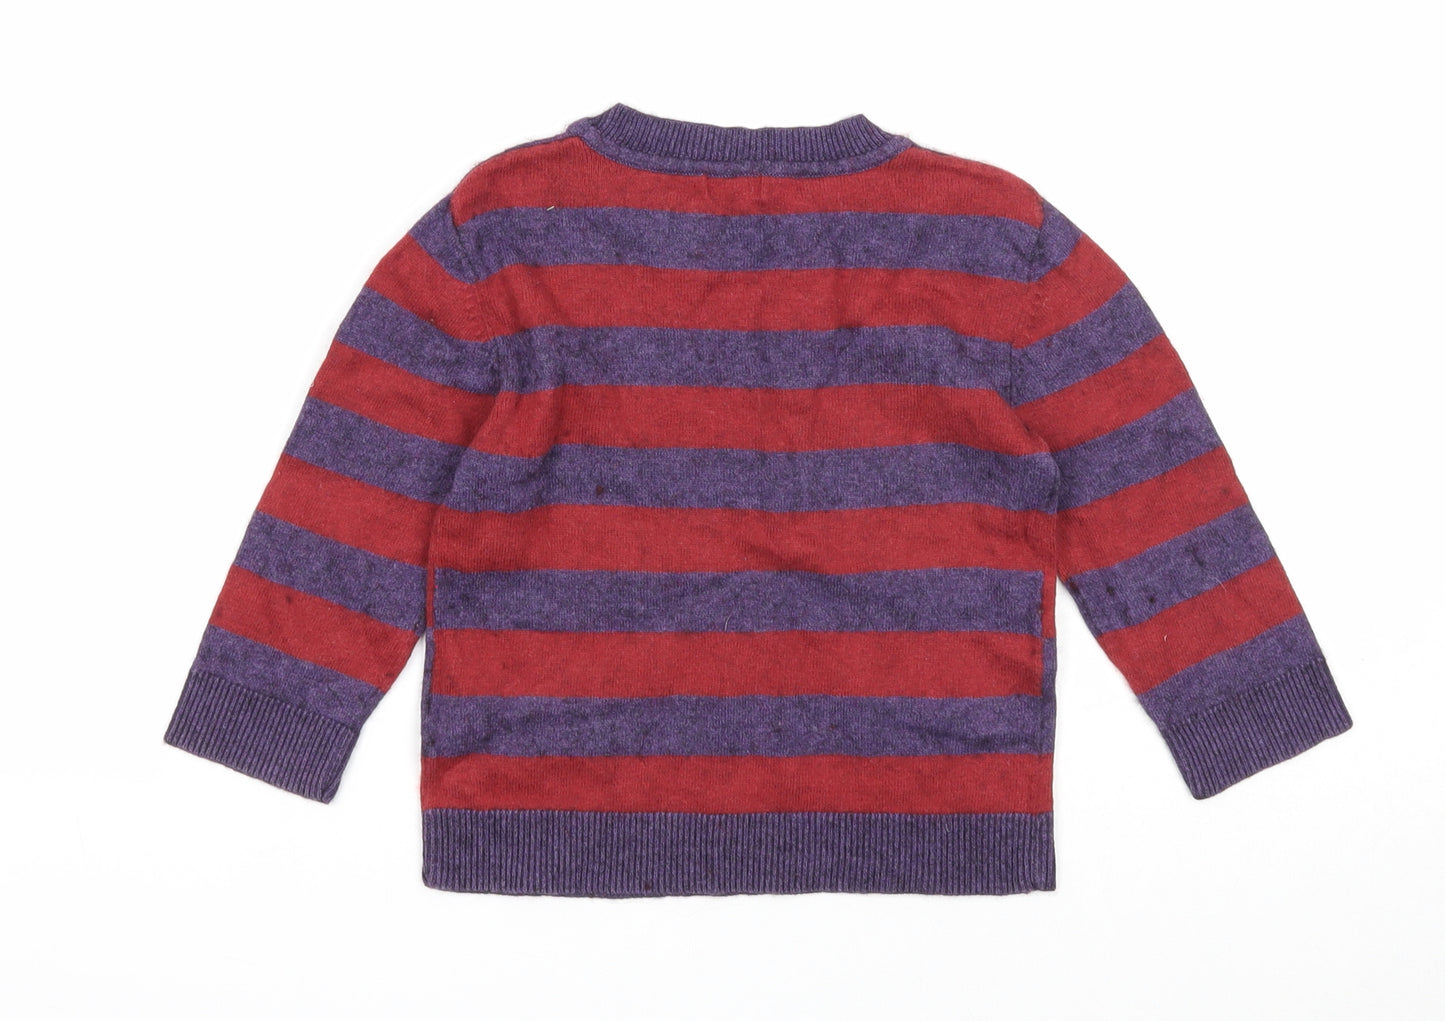 Monsoon Boys Purple Round Neck Striped Cotton Pullover Jumper Size 3-4 Years Pullover